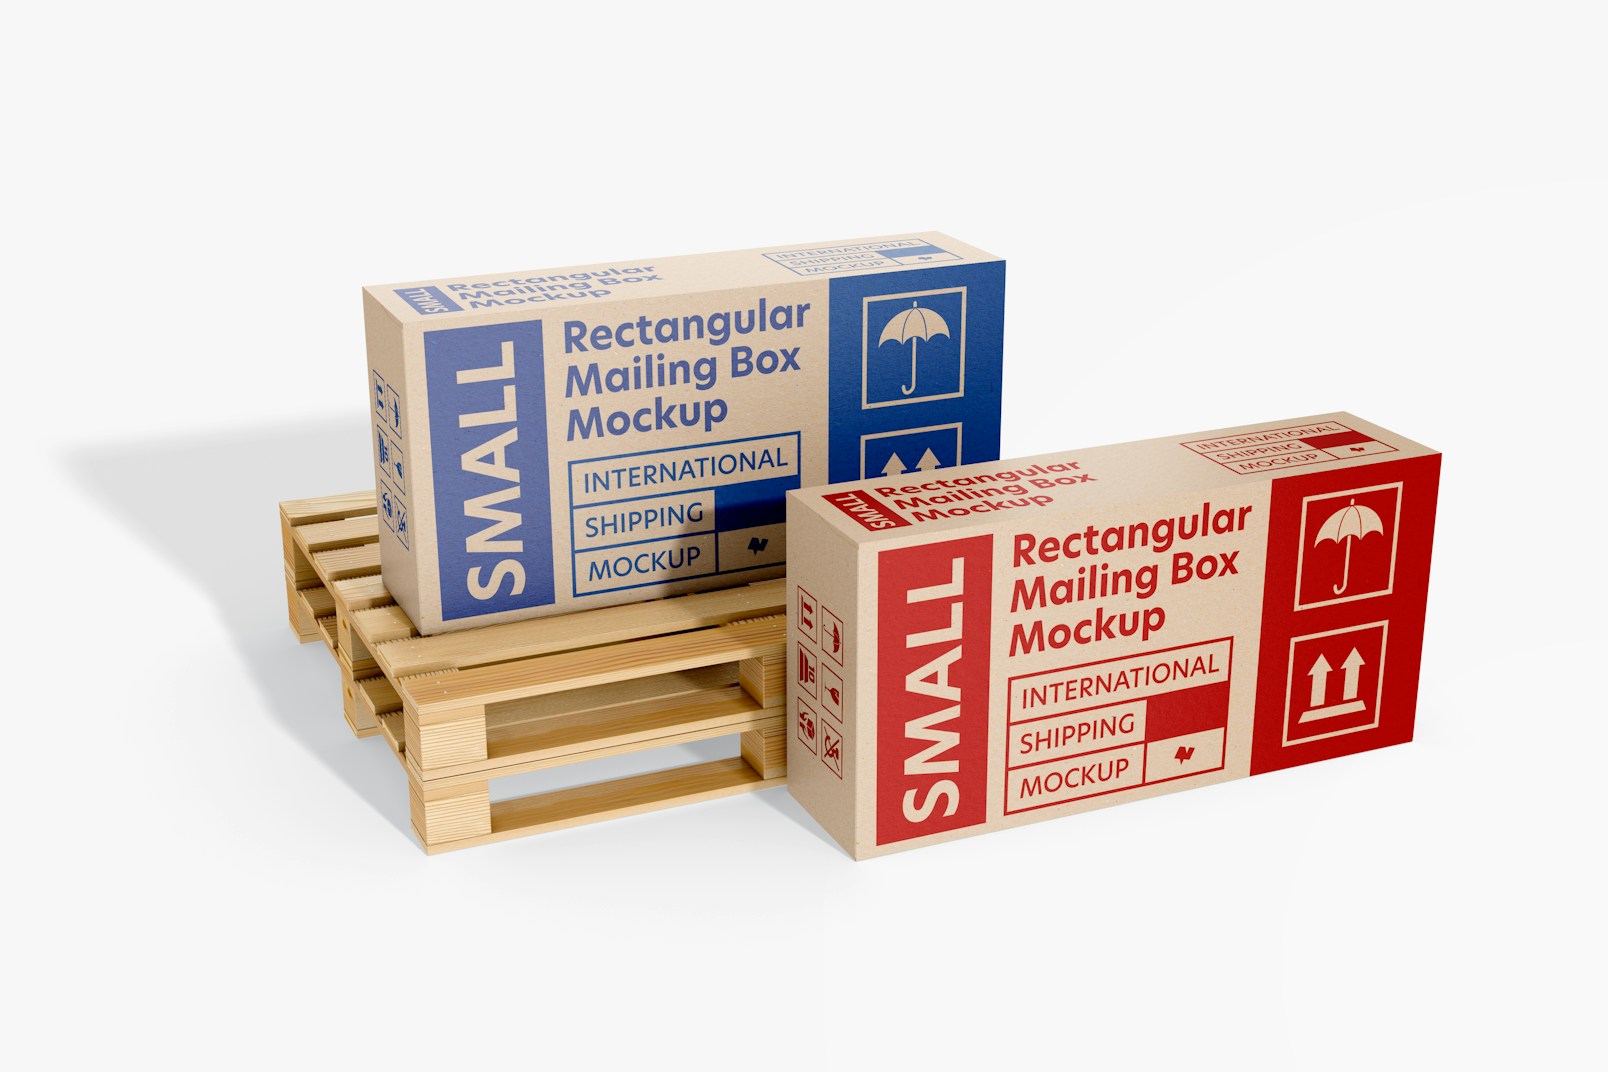 Rectangular Mailing Boxes Mockup, Side View